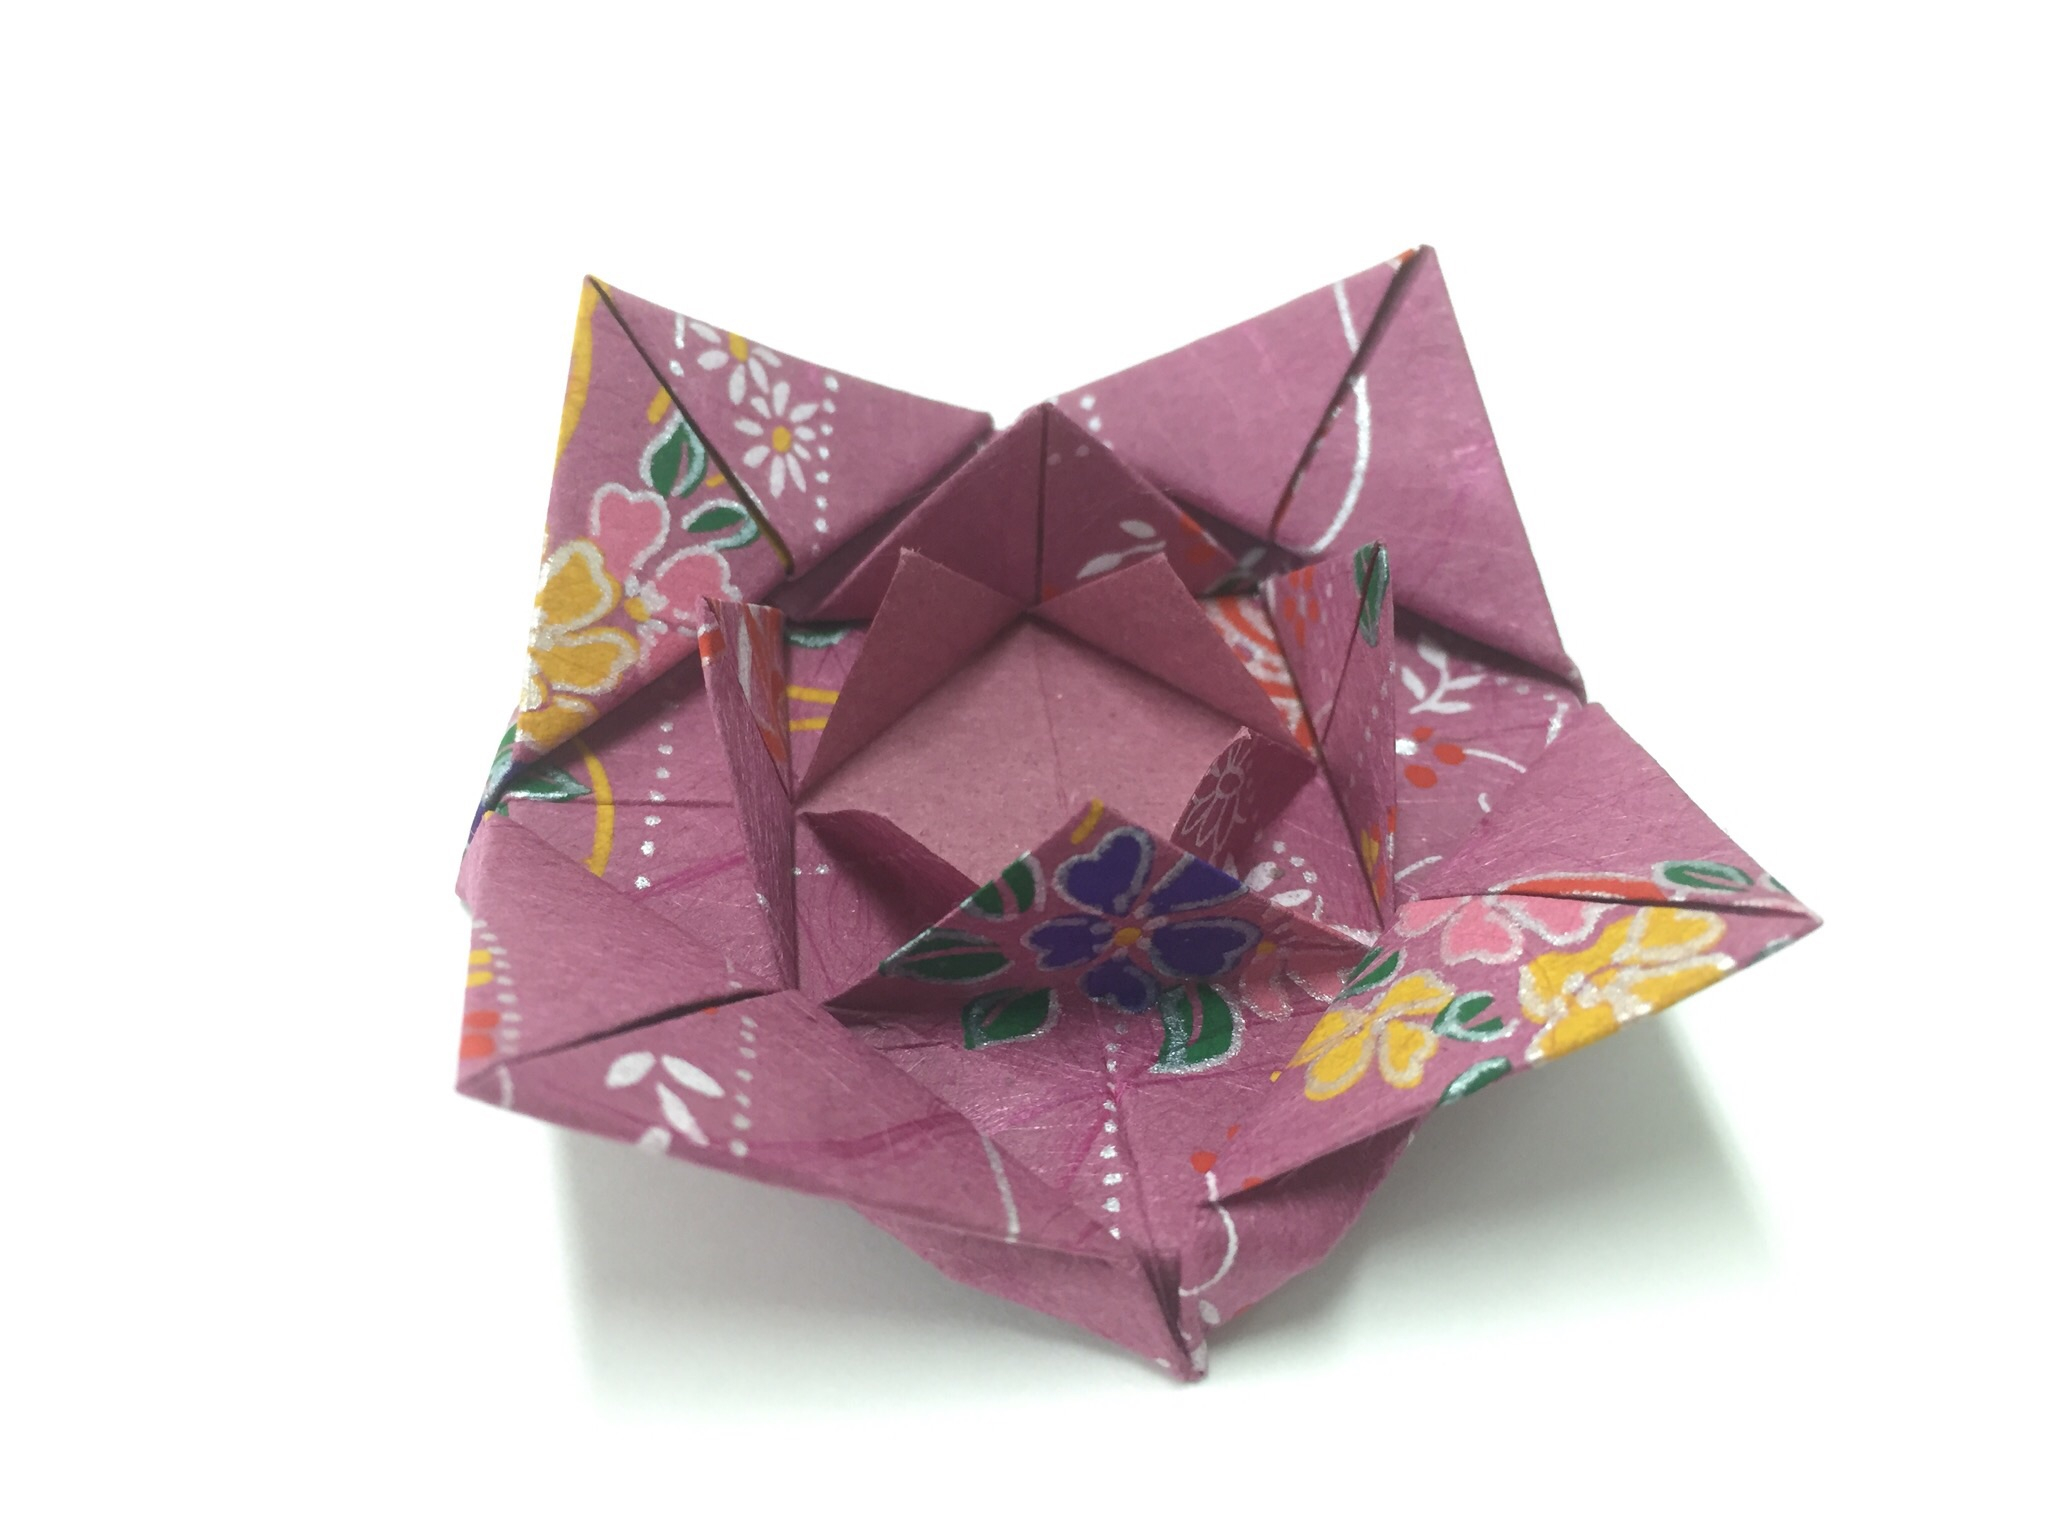 How To Make An Origami Rose Easy How To Make An Origami Rose In 8 Easy Steps From Japan Blog